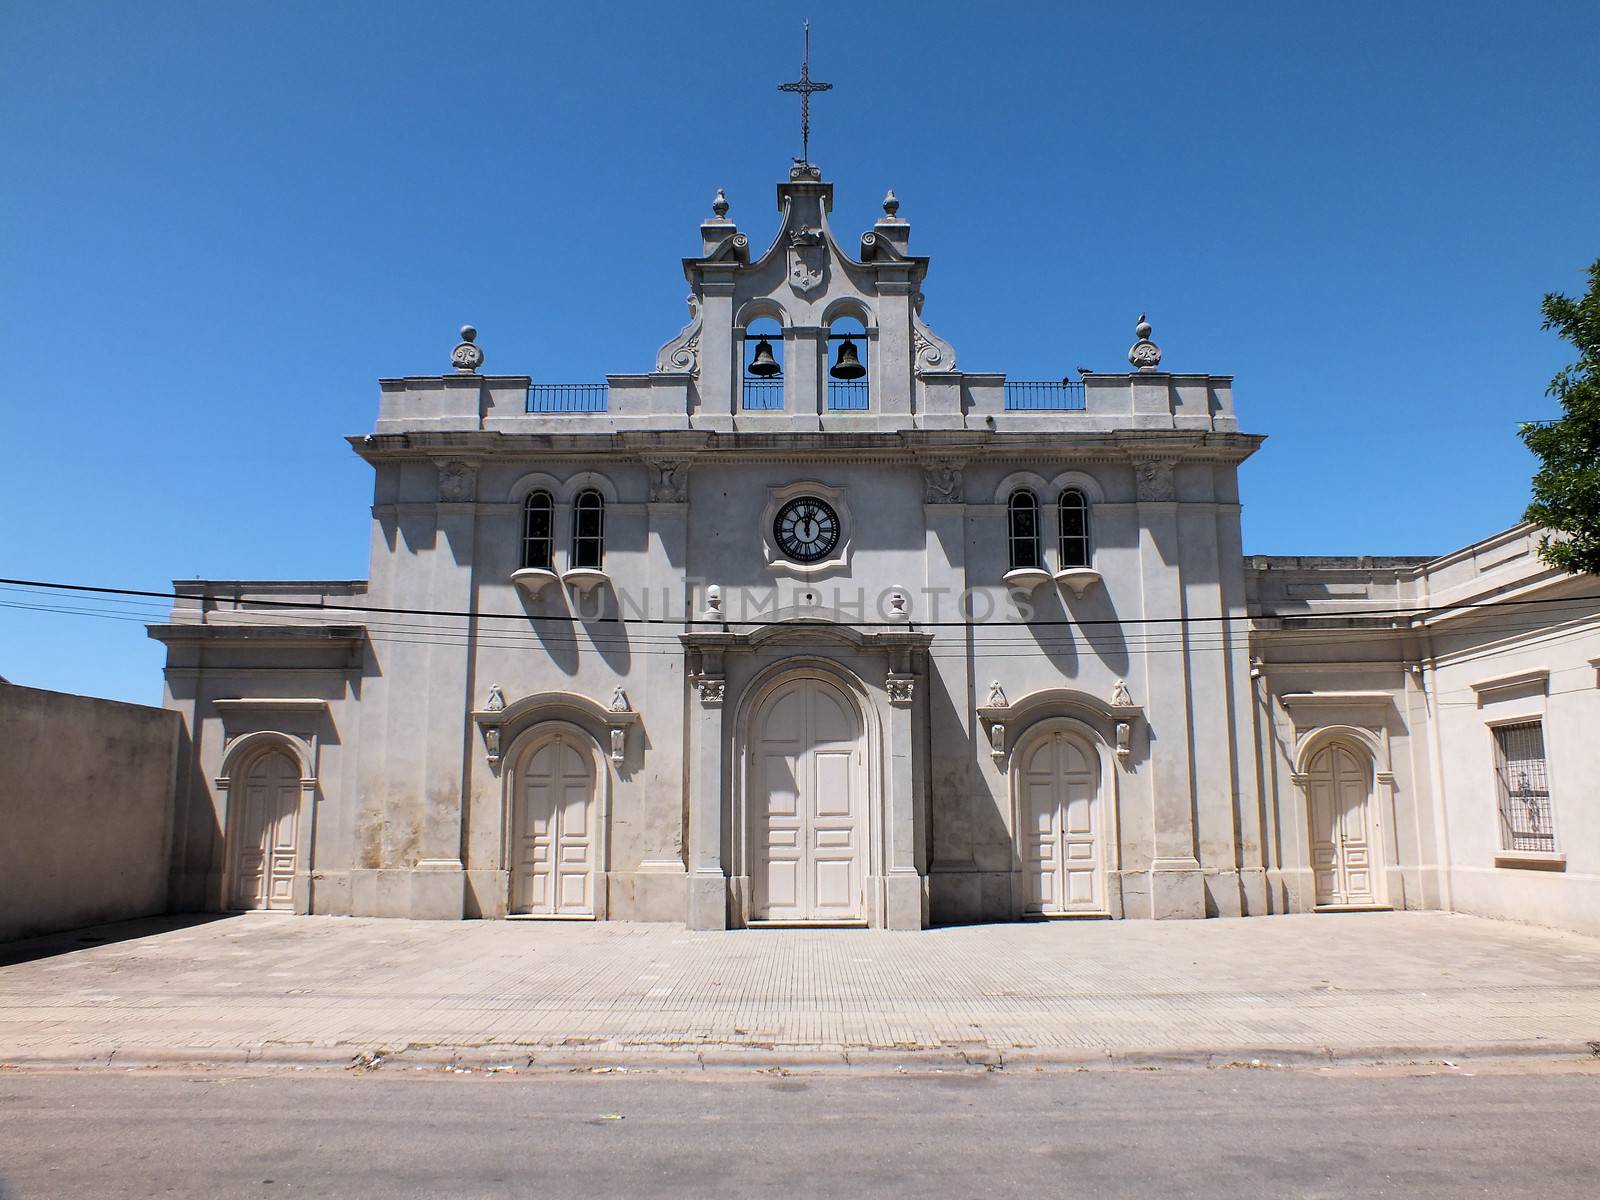 The town of Carmelo was founded with the construction of the first Templo del Carmen, which was first a simple adobe and straw construction. In 1830, a group of townsfolk began building the present church, with salvaged materials from the ancient Temple of Vipers in the Orphan Calera. The work culminated in 1848.